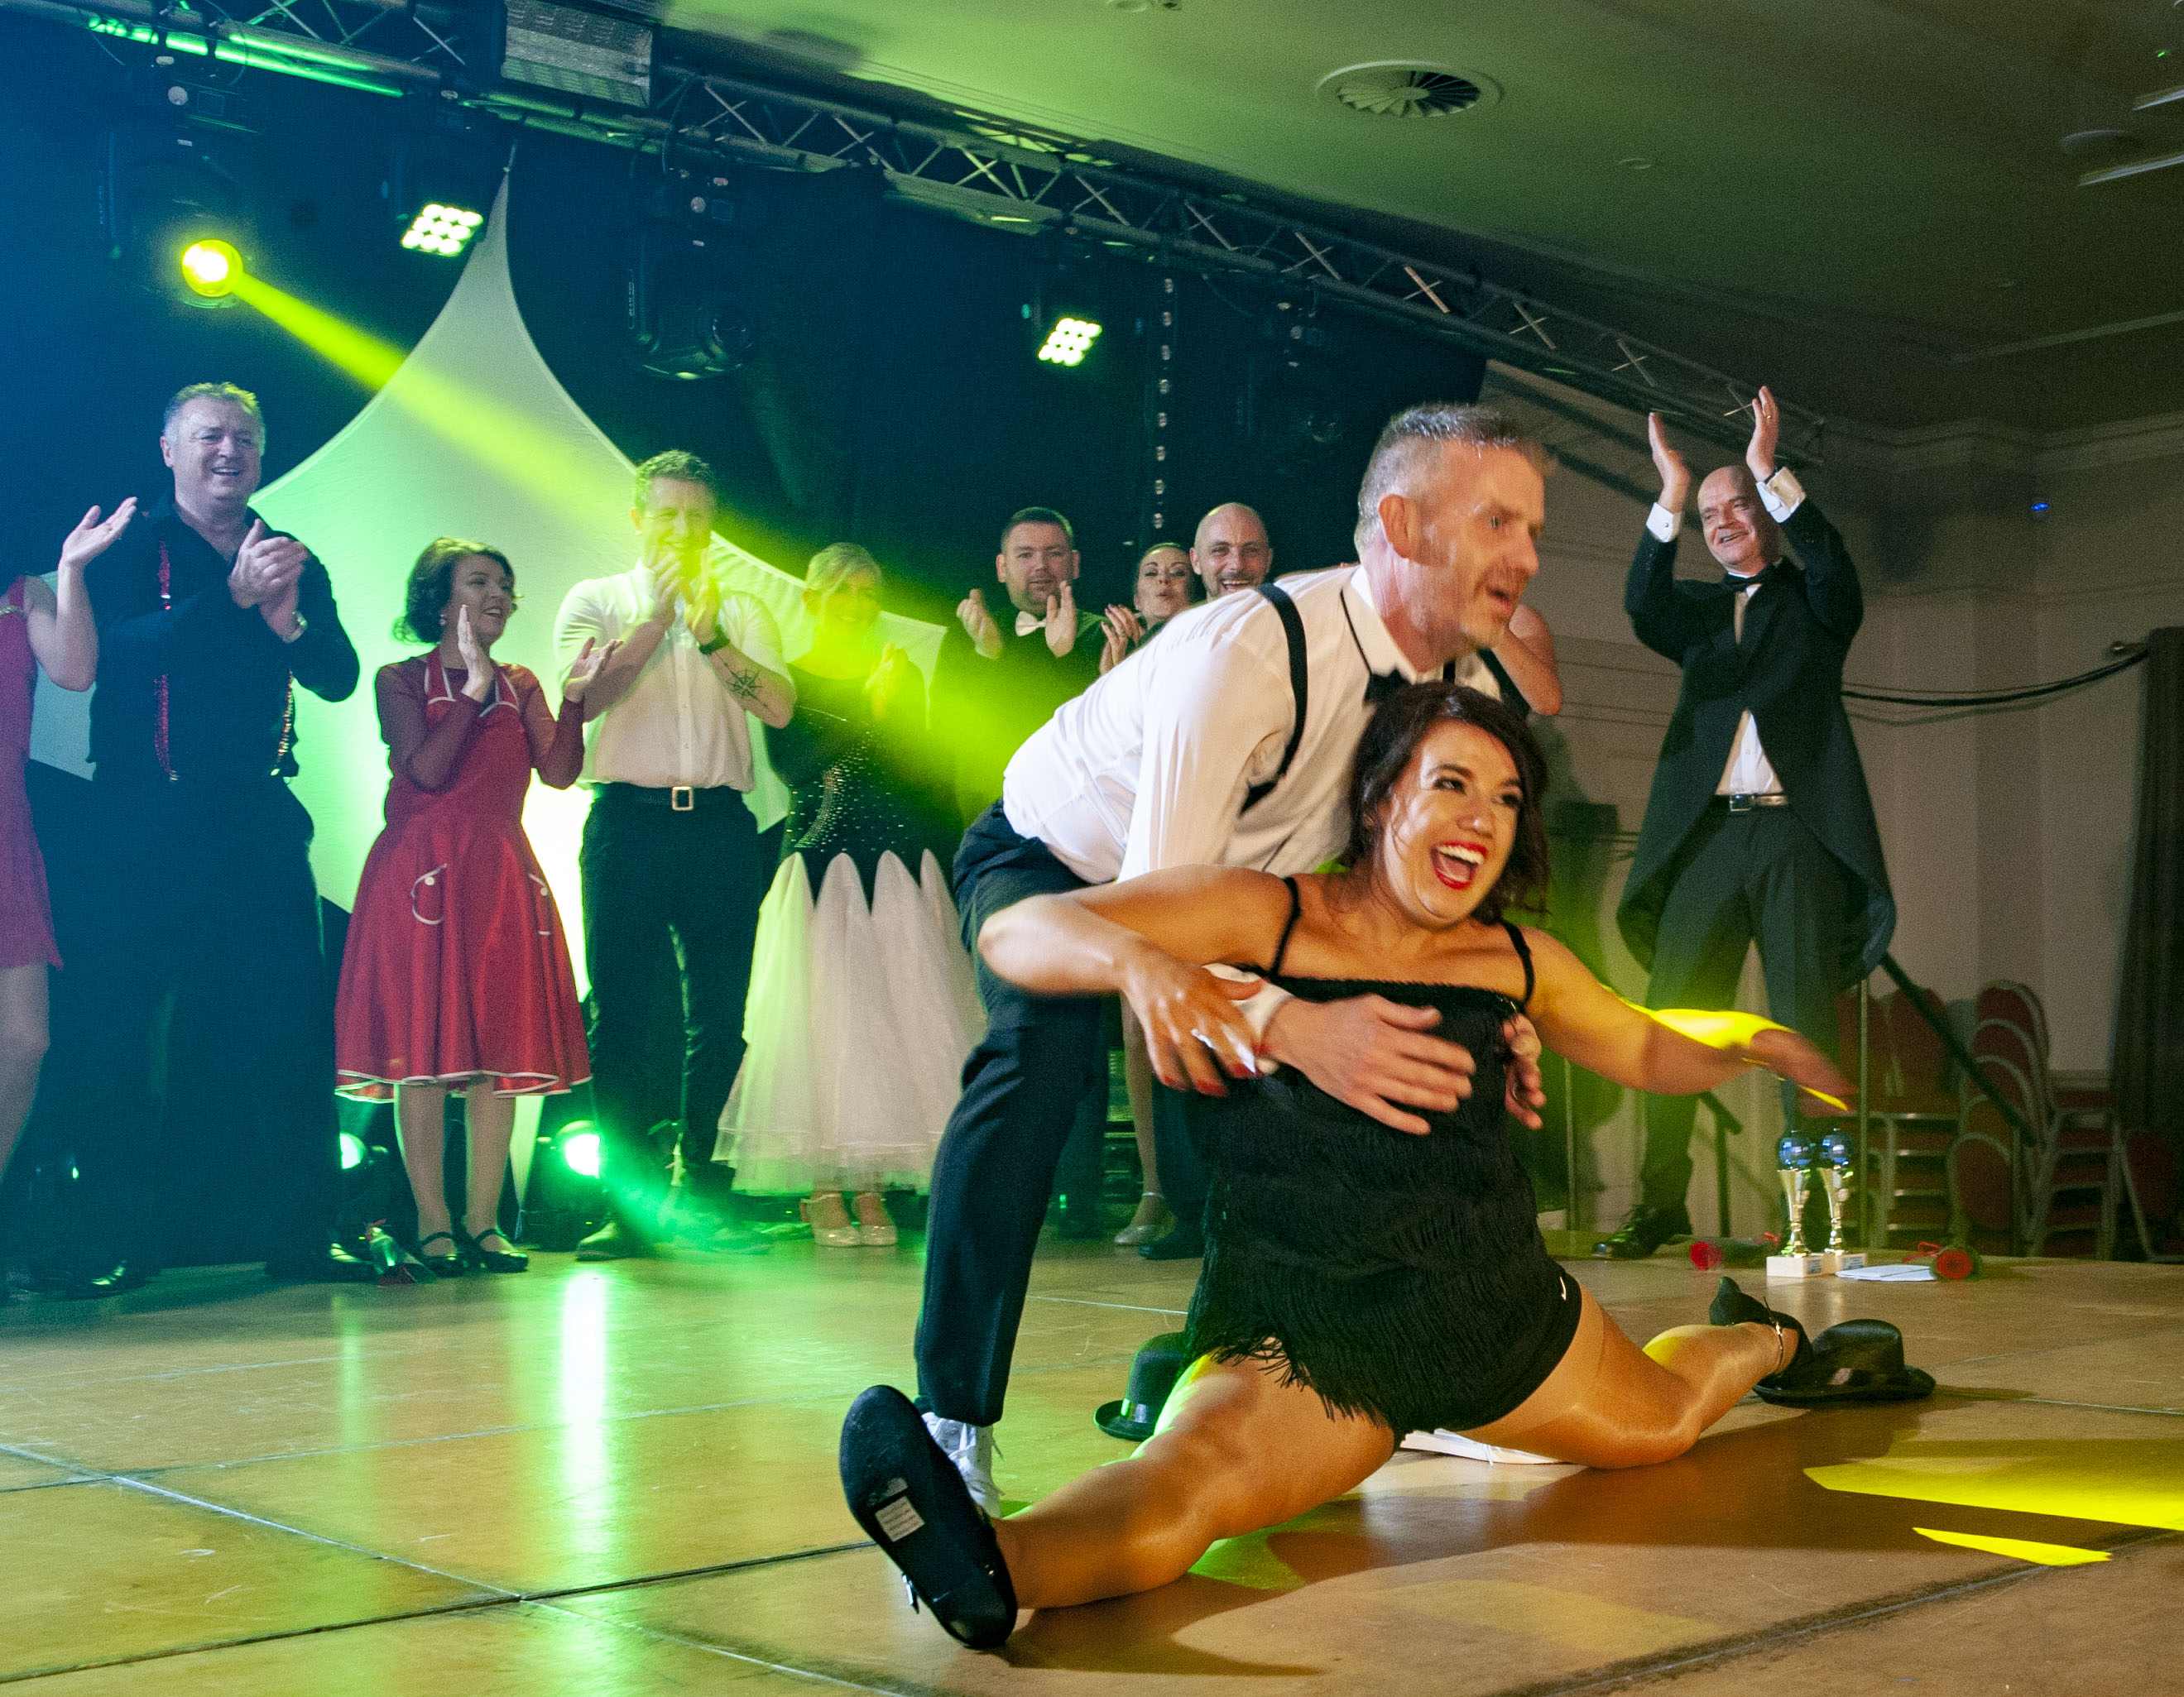 PHOTOS Strictly Brian Dillons 2020 Come Dancing TheCork.ie (News